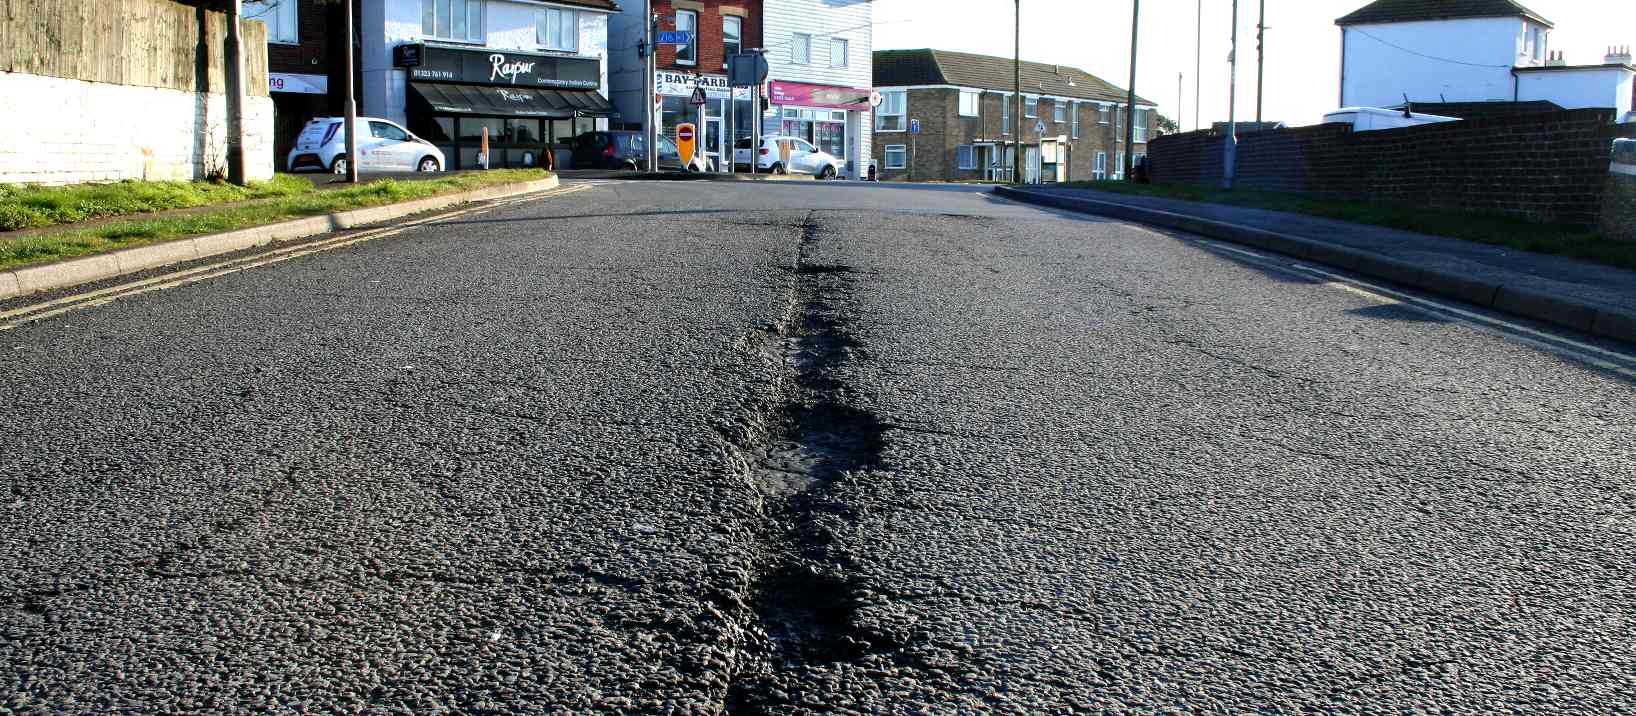 Potholed roads is an indication of defective politics and policies